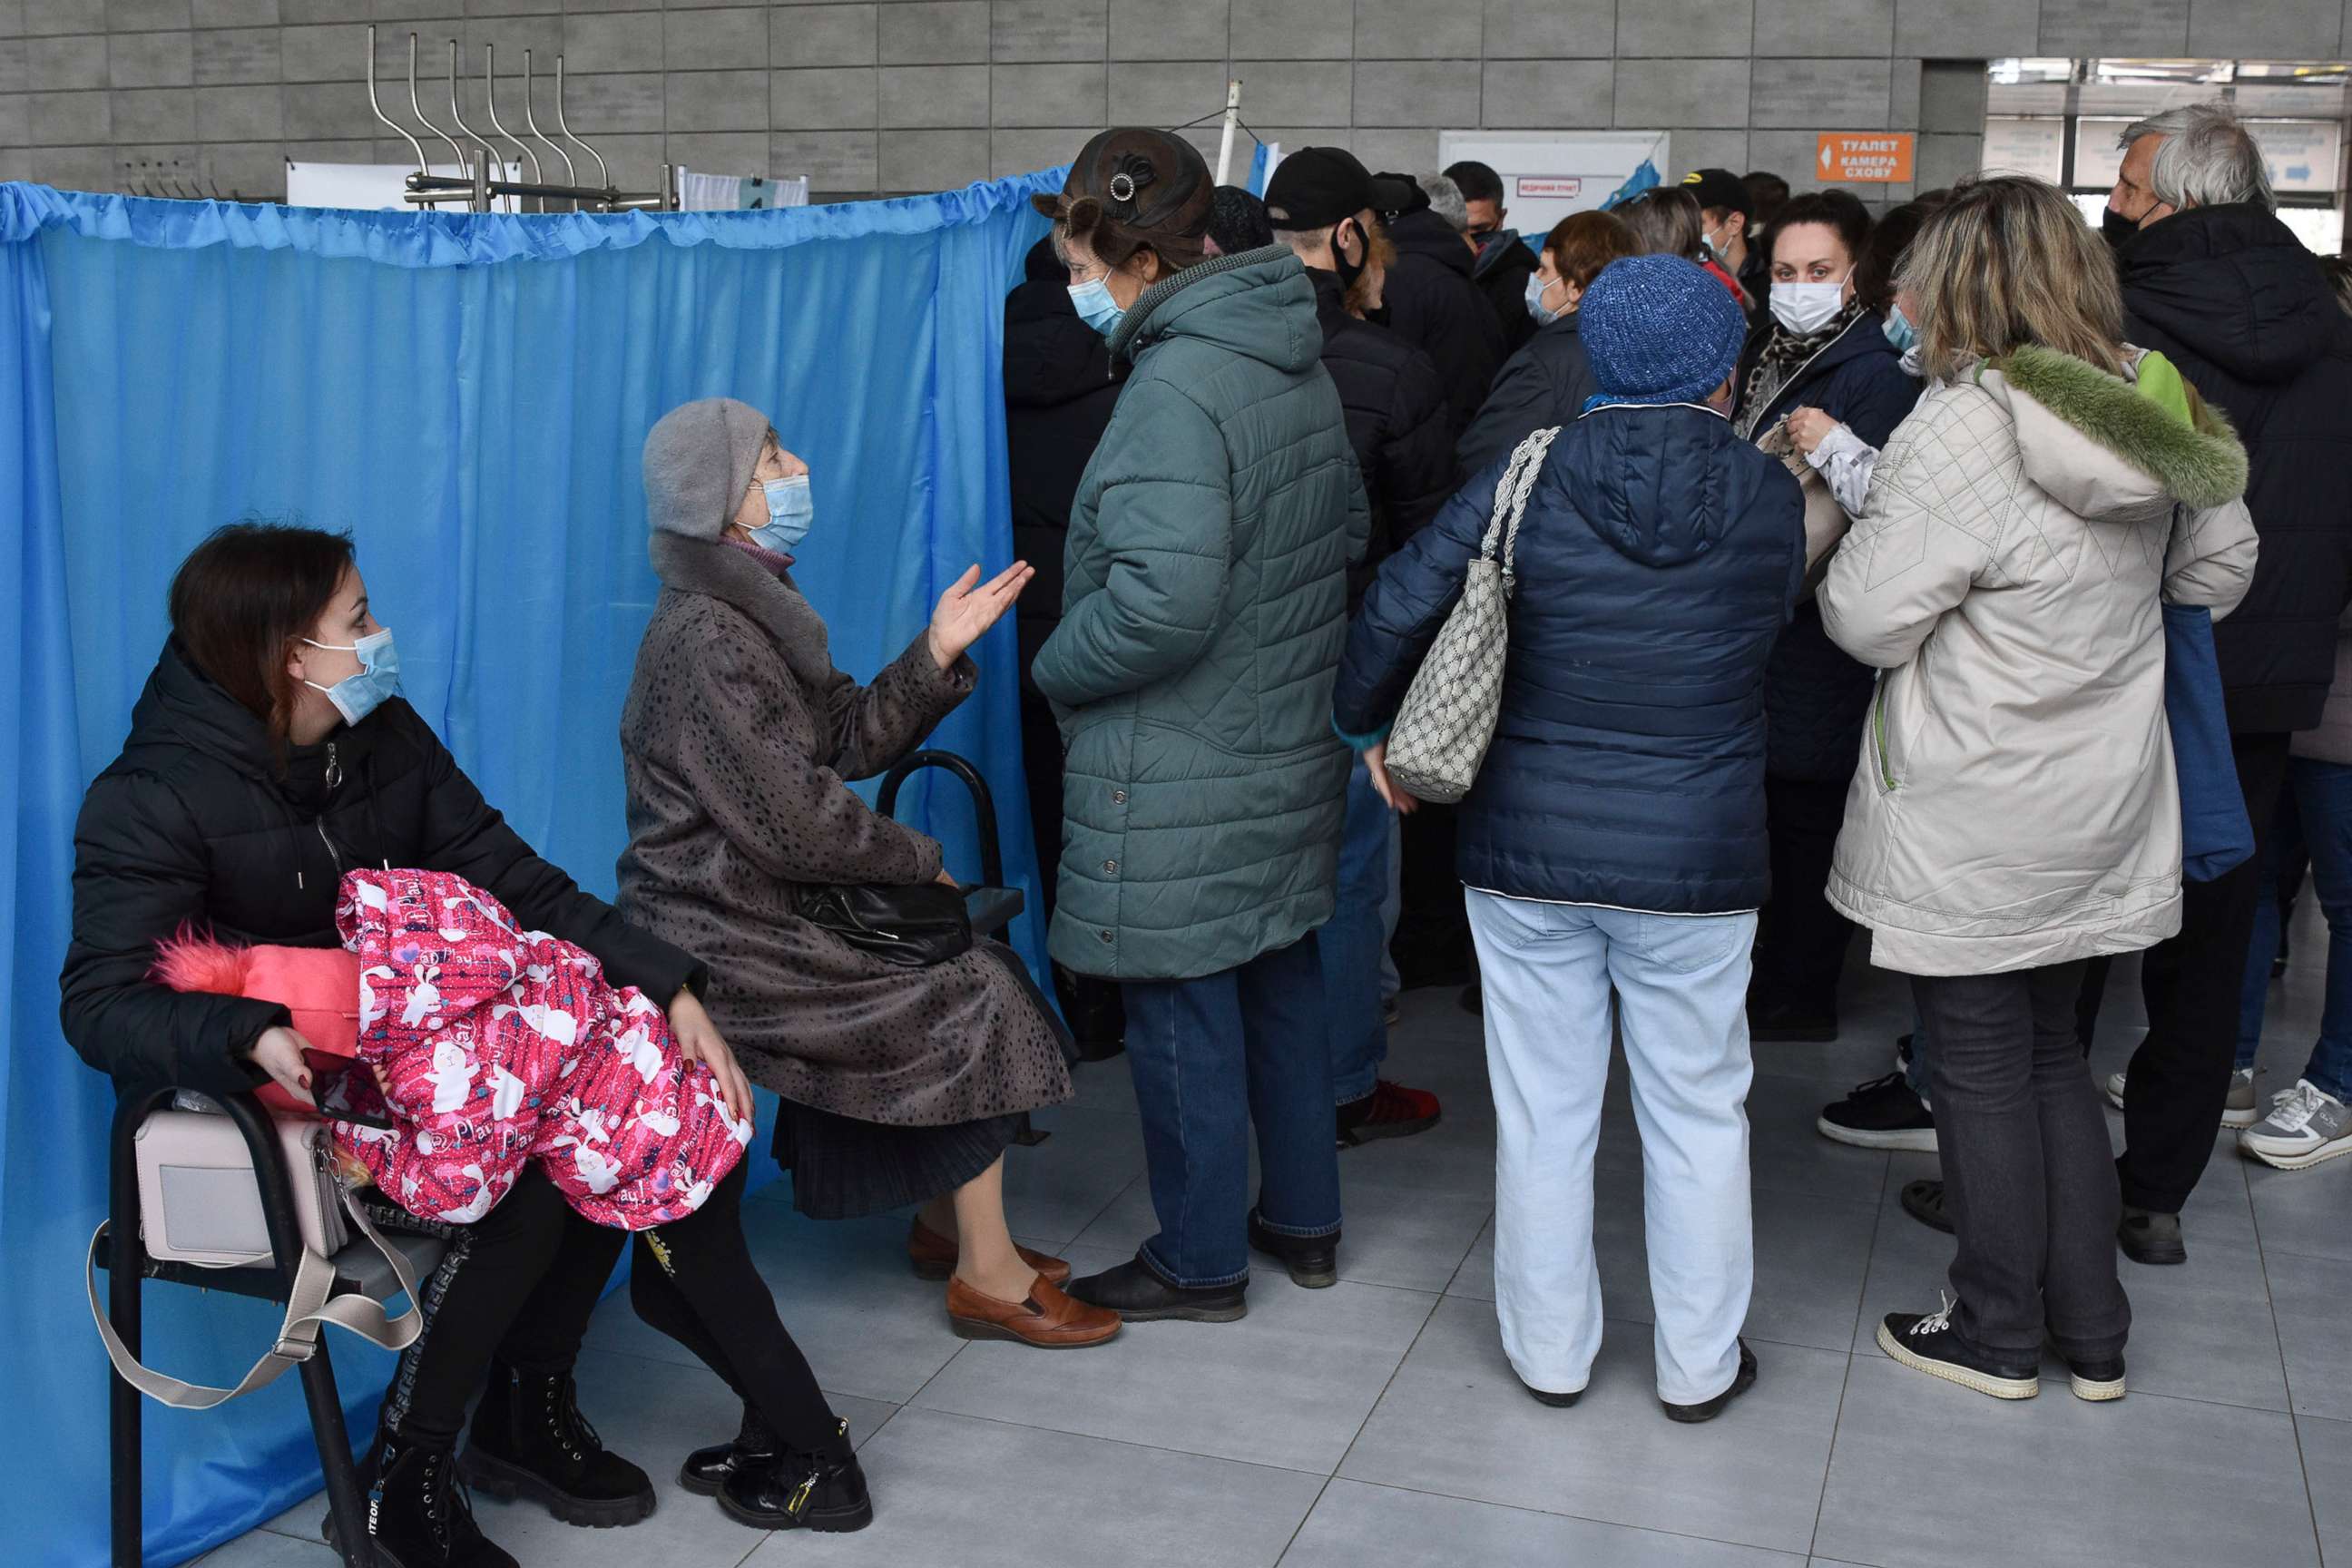 PHOTO: People wait for their turn at a vaccination center in Kramatorsk, Ukraine, Oct. 22, 2021.